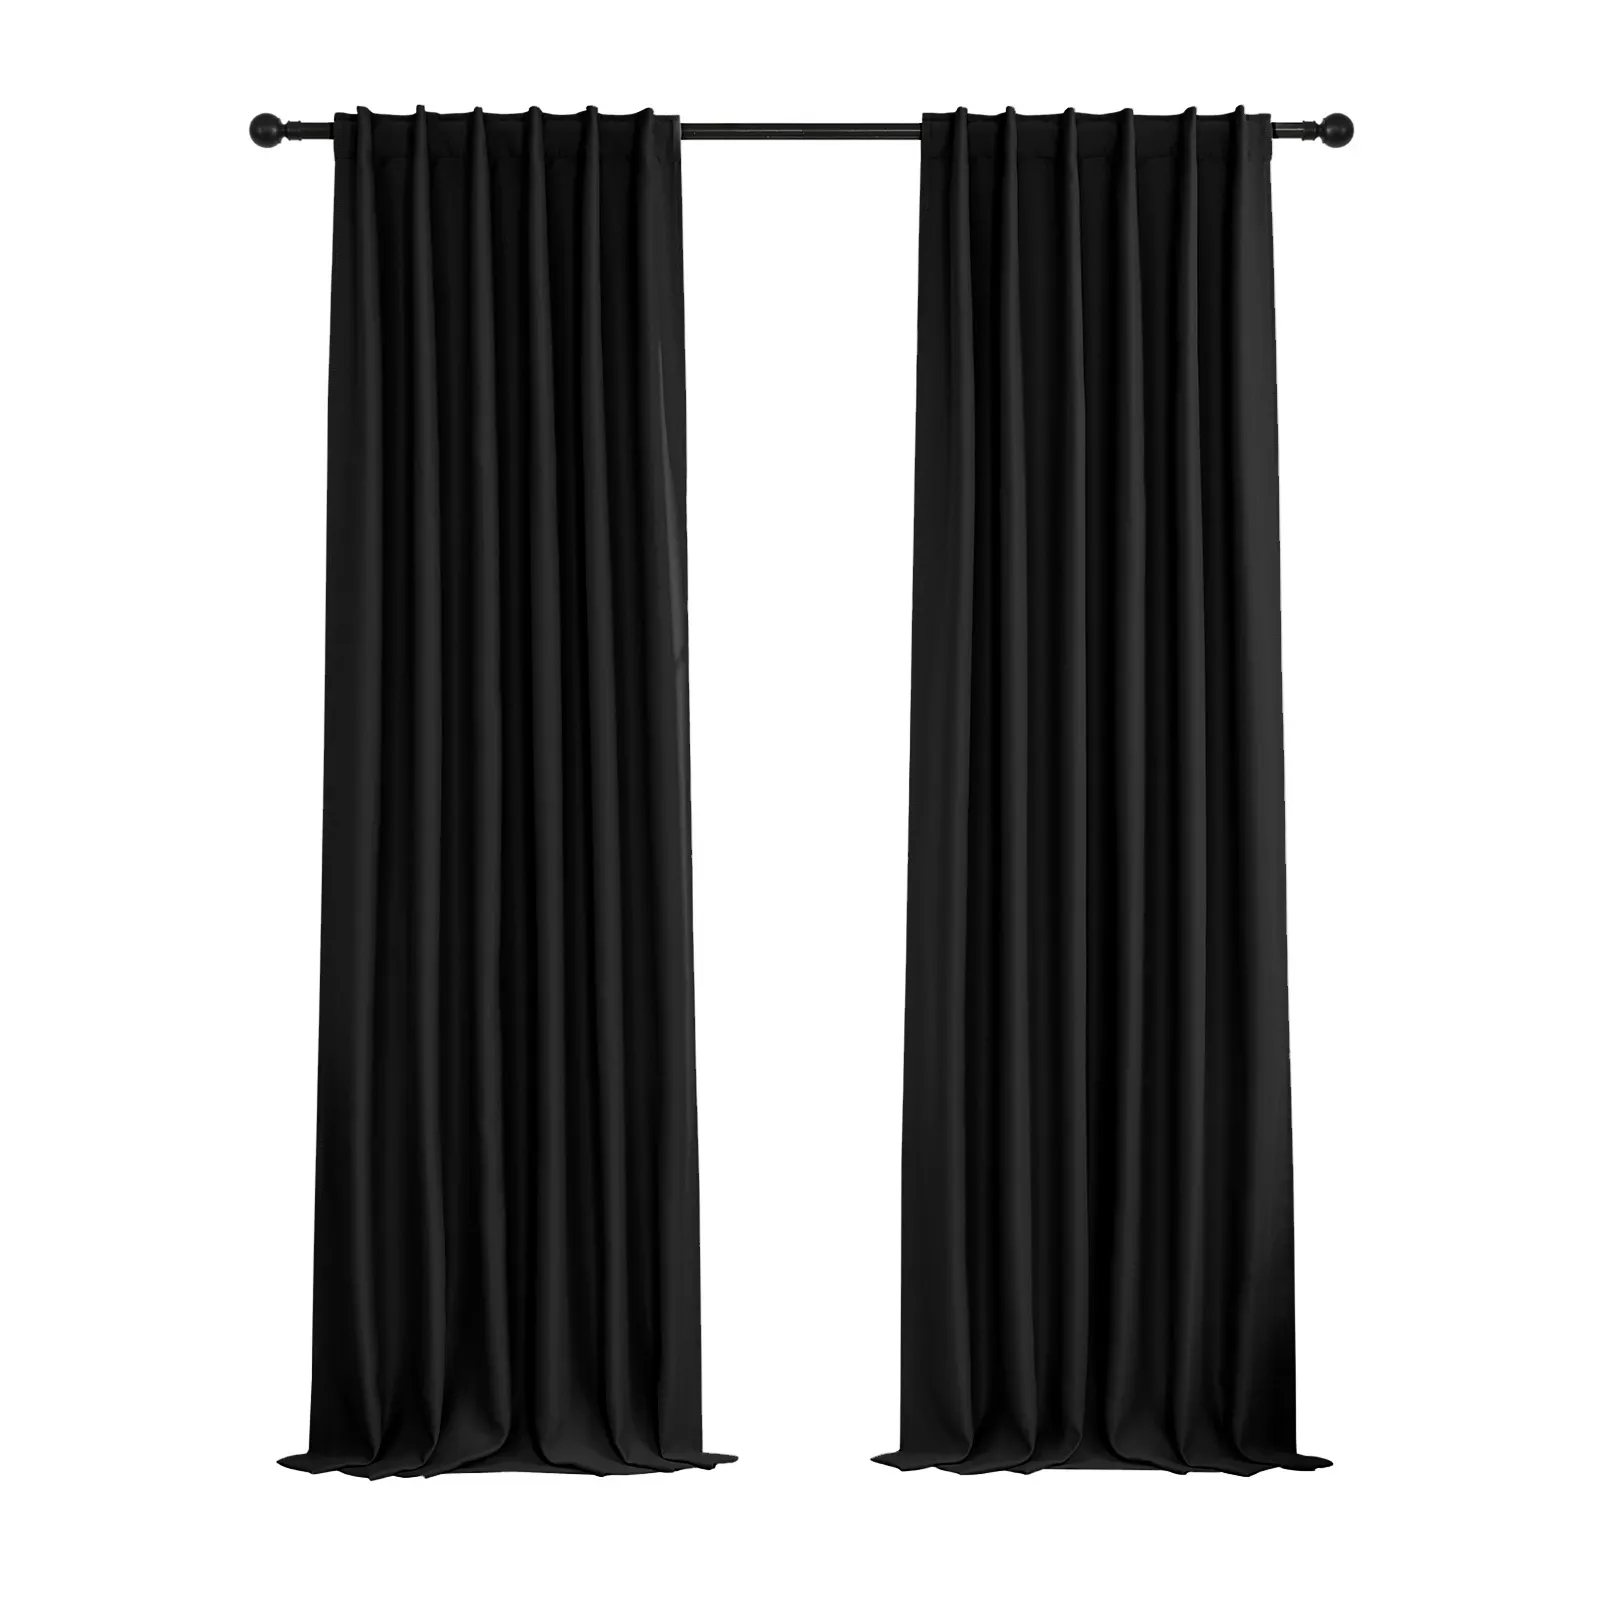 Gray Blackout Curtains & Drapes for Bedroom - Thermal Curtains Grommet Noise Reducing Room Darkening for Living Room